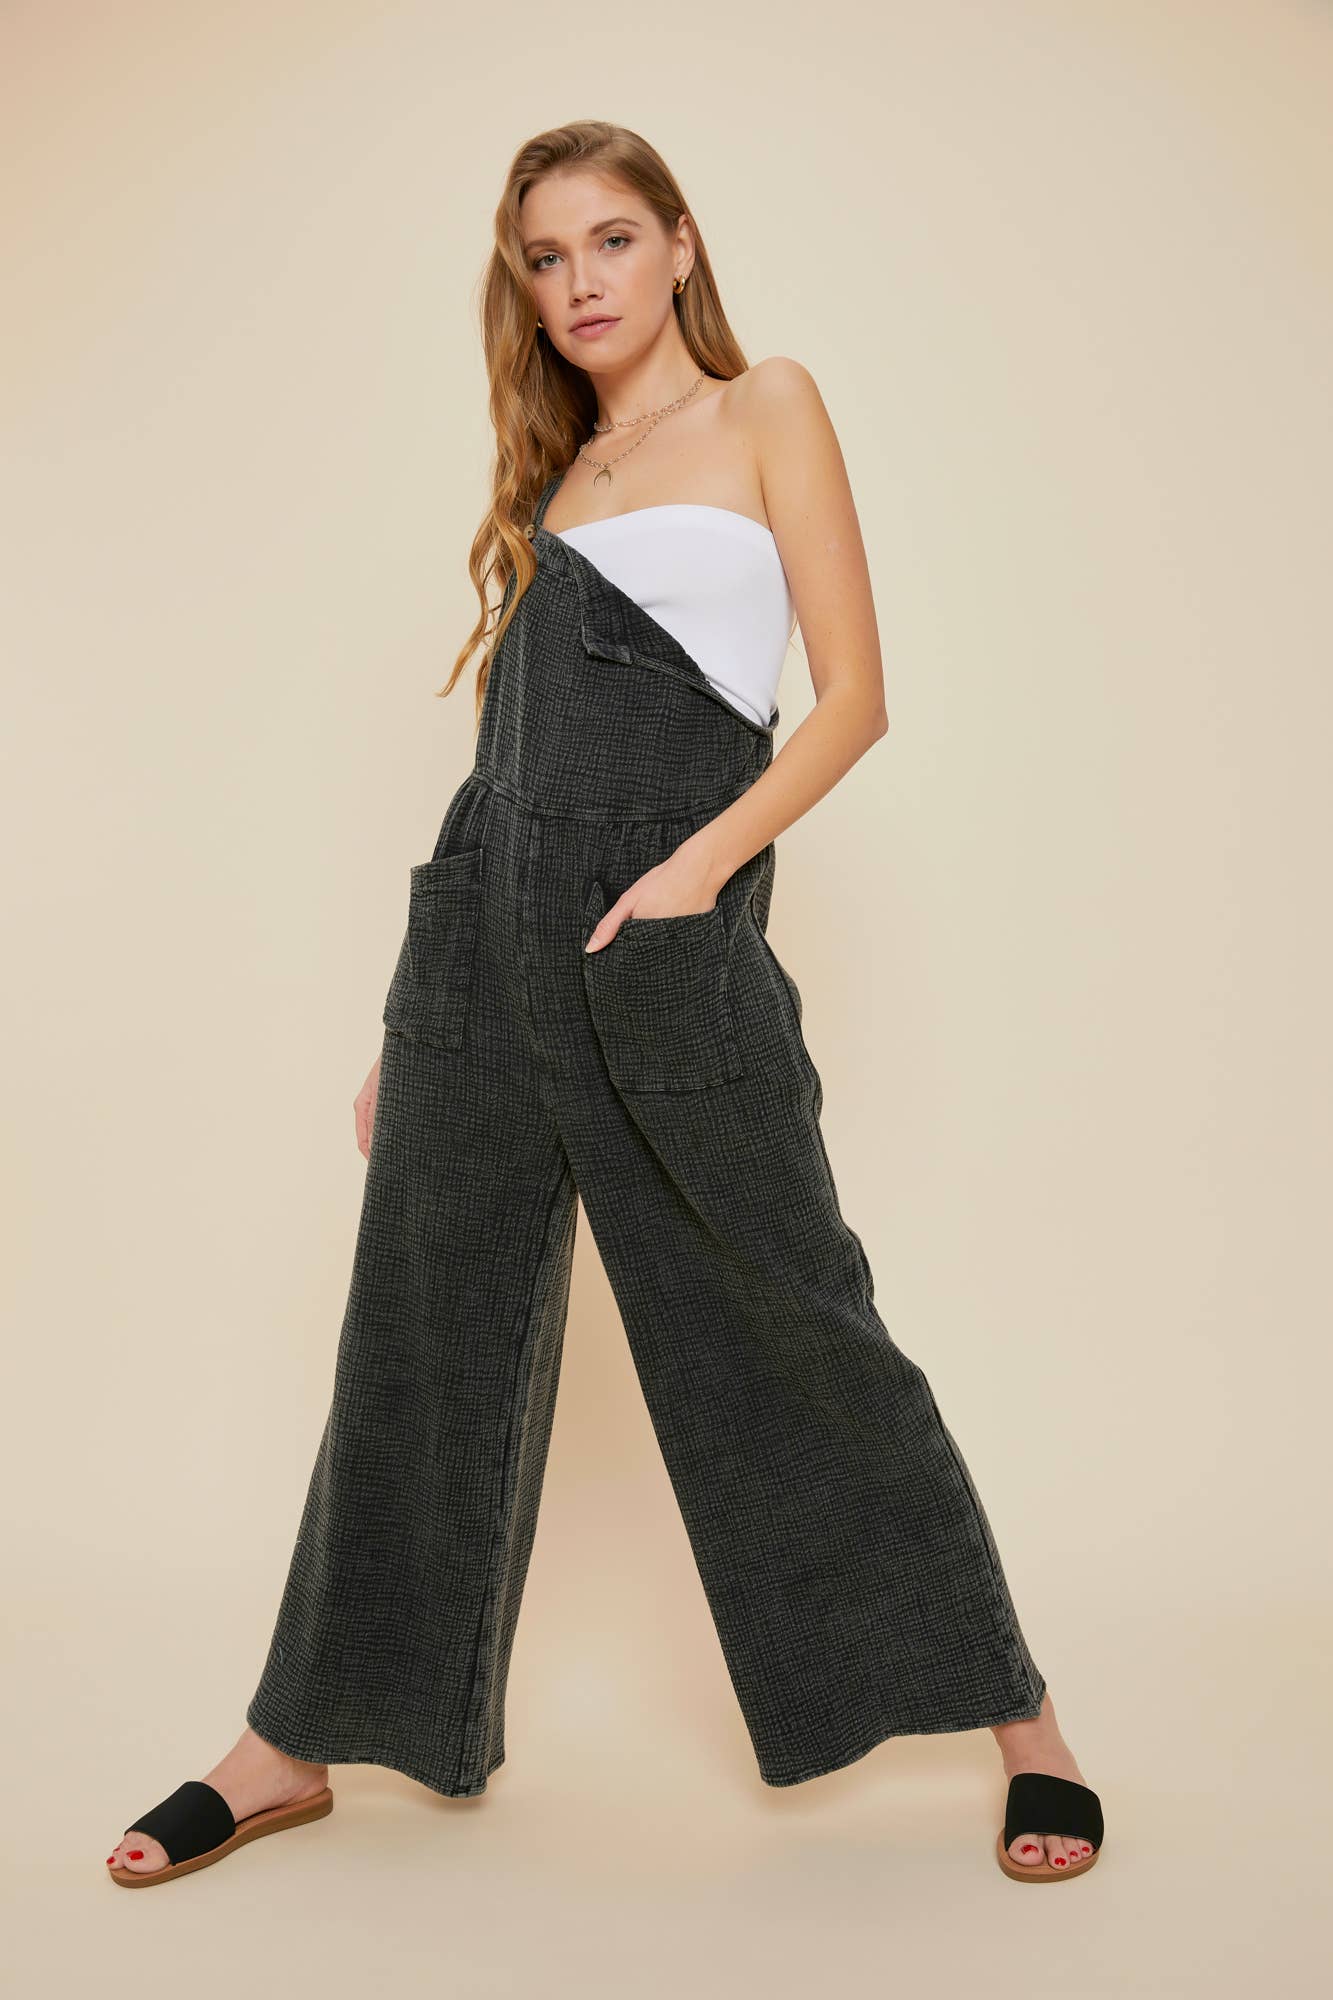 100% Cotton Curvy Mineral Wash Overall